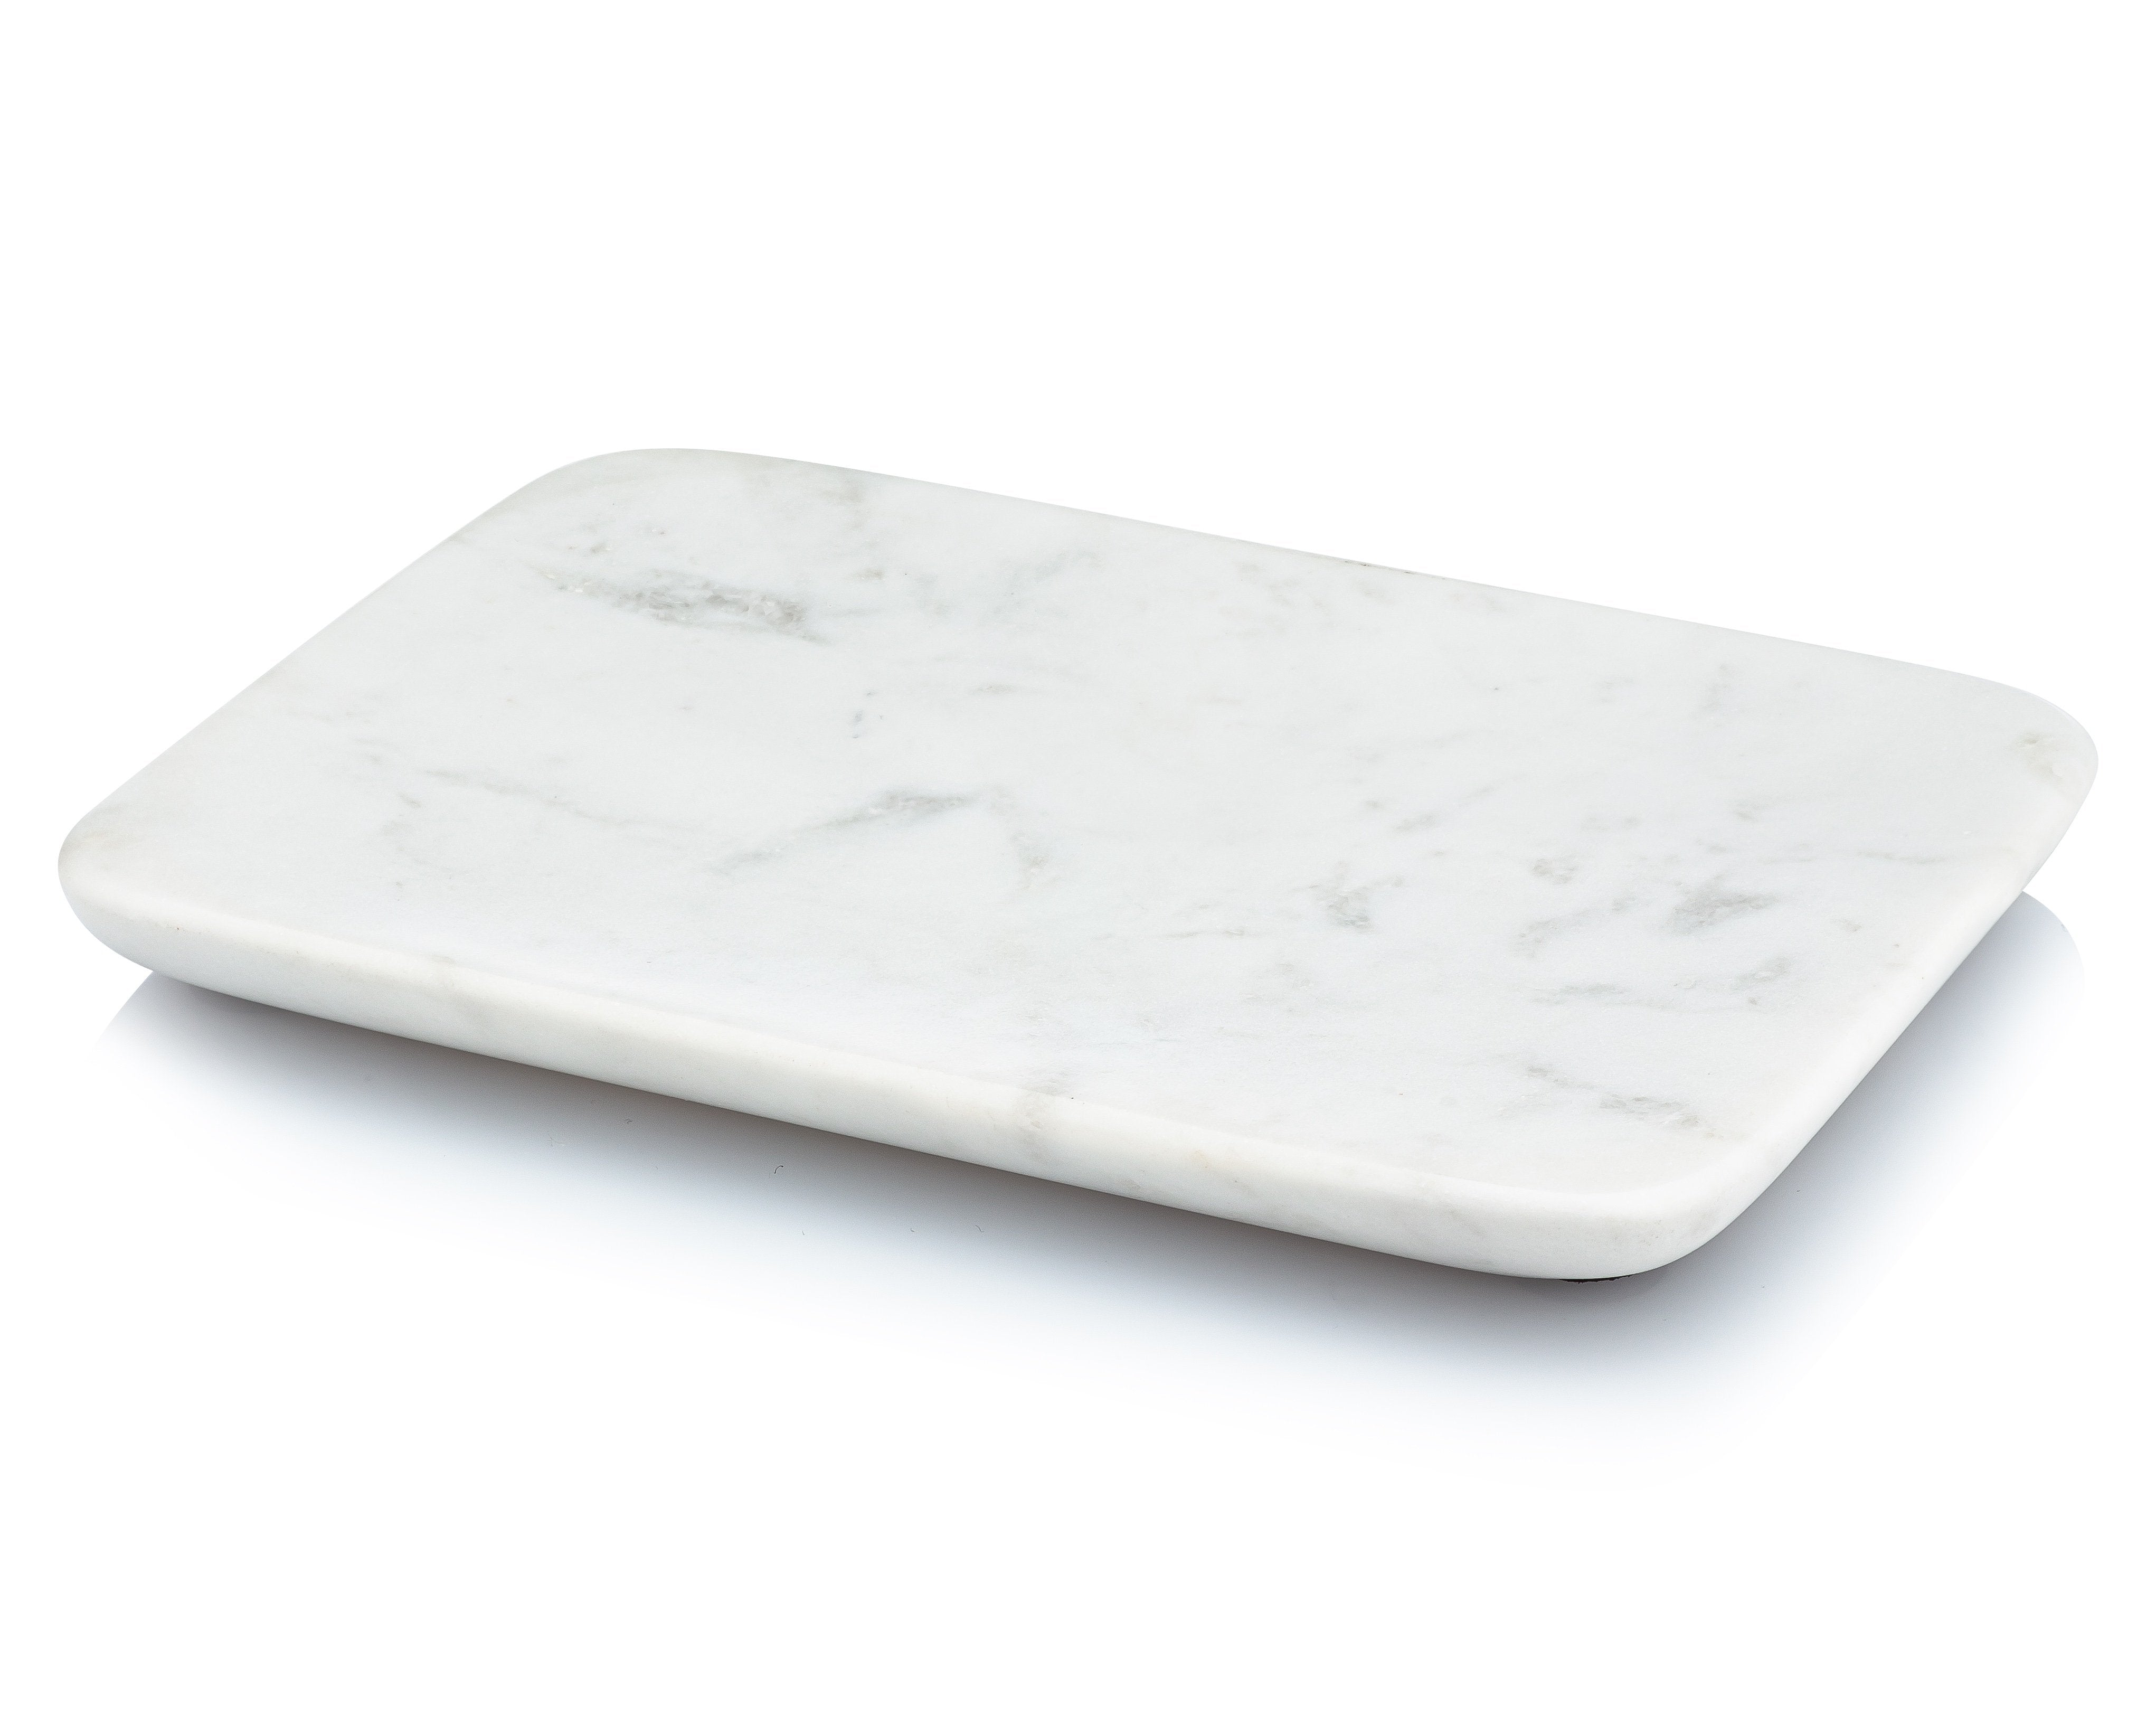 Beau Brummell for Men Marble Accessory Tray